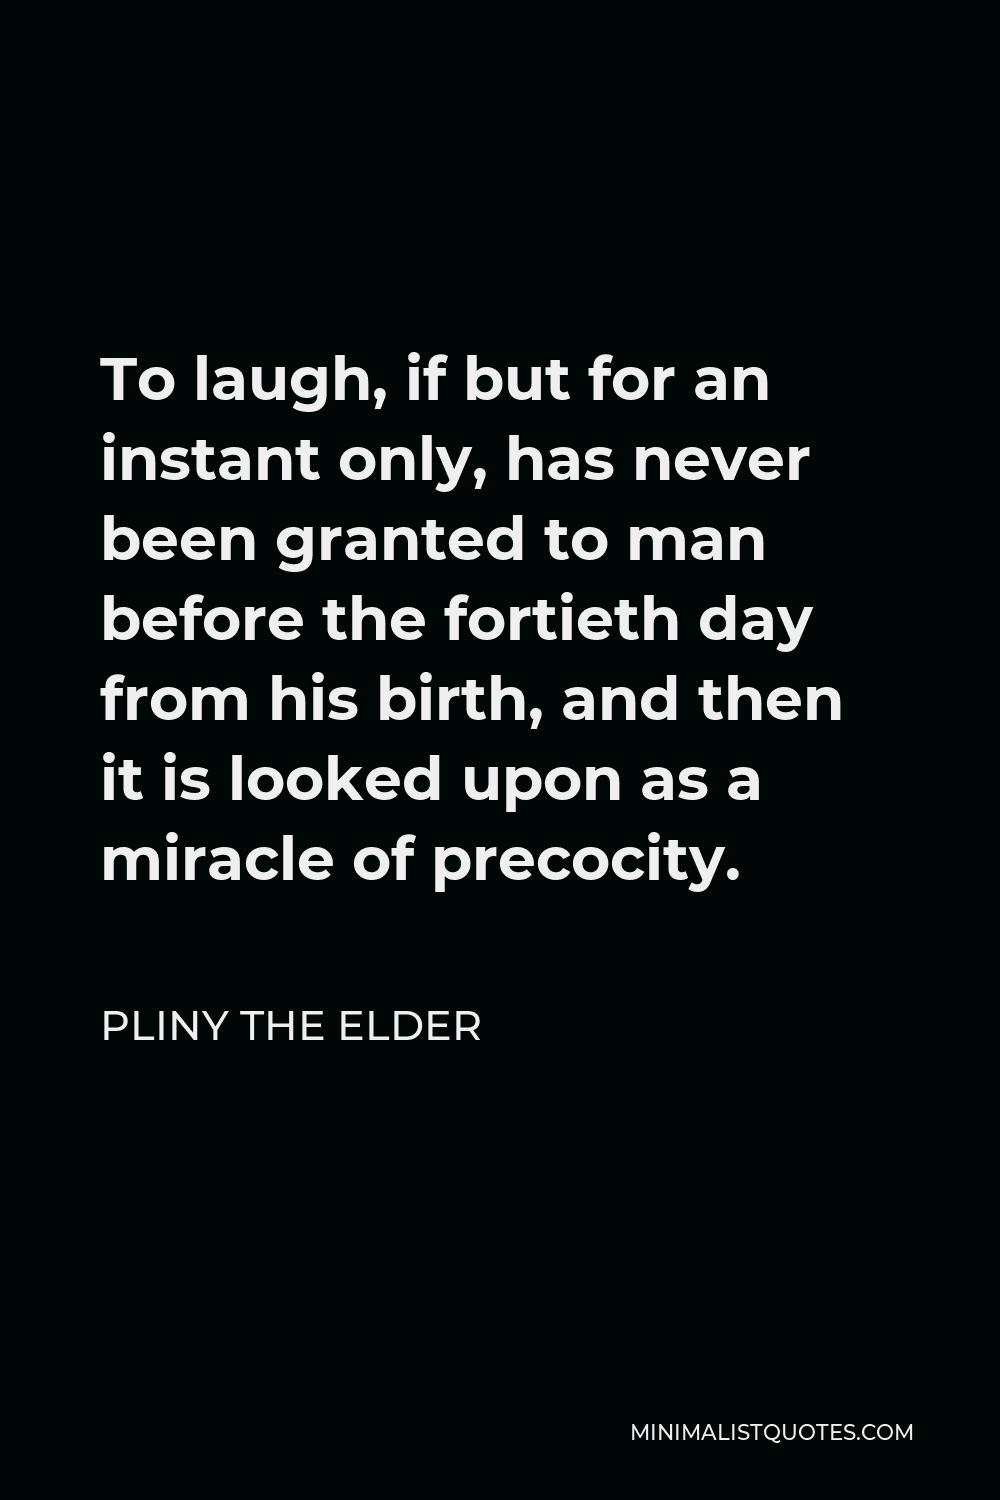 Pliny the Elder Quote - To laugh, if but for an instant only, has never been granted to man before the fortieth day from his birth, and then it is looked upon as a miracle of precocity.